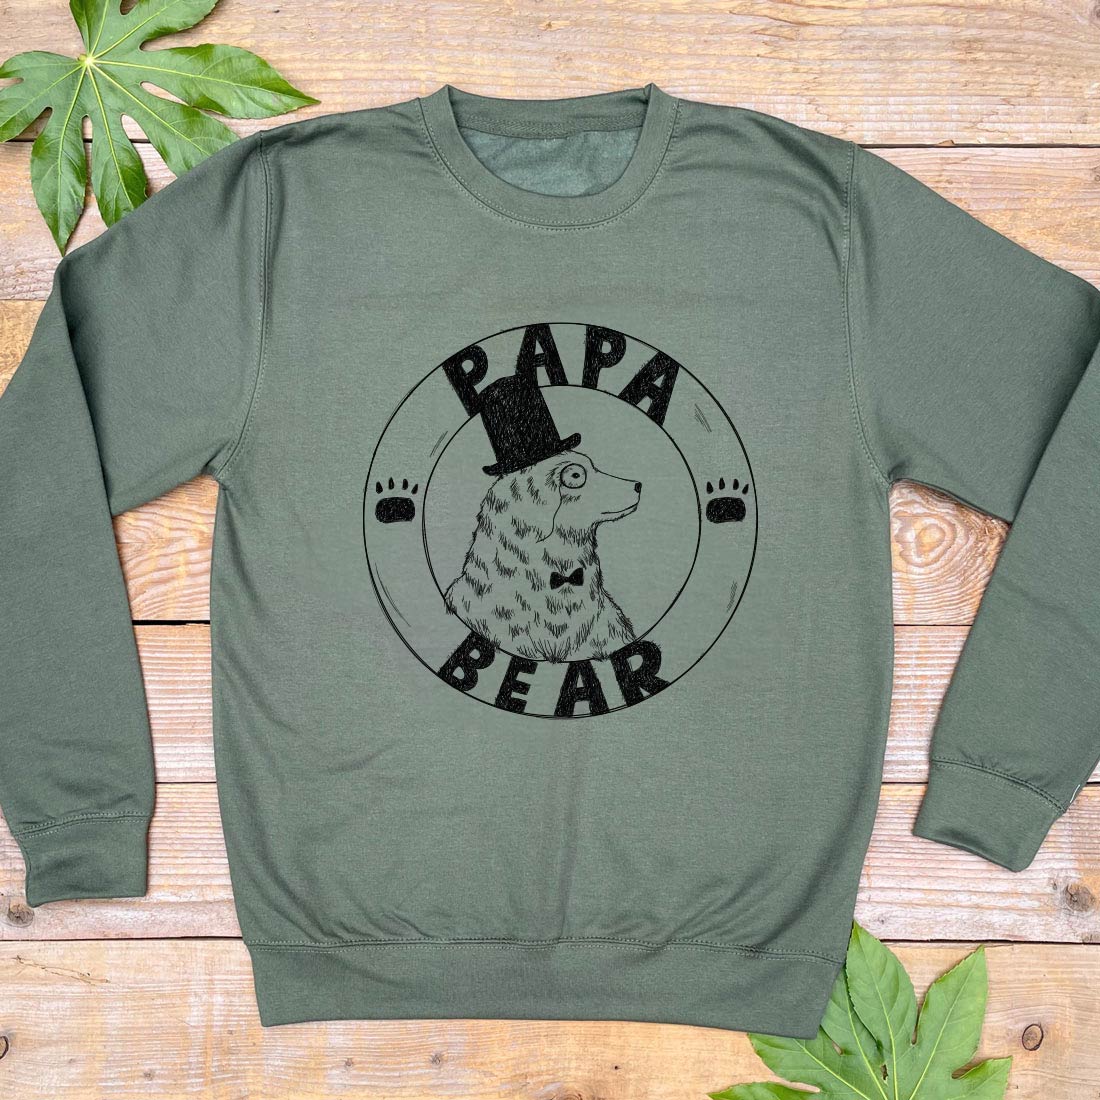 jumper bear with papa bear text and bear in a top hat